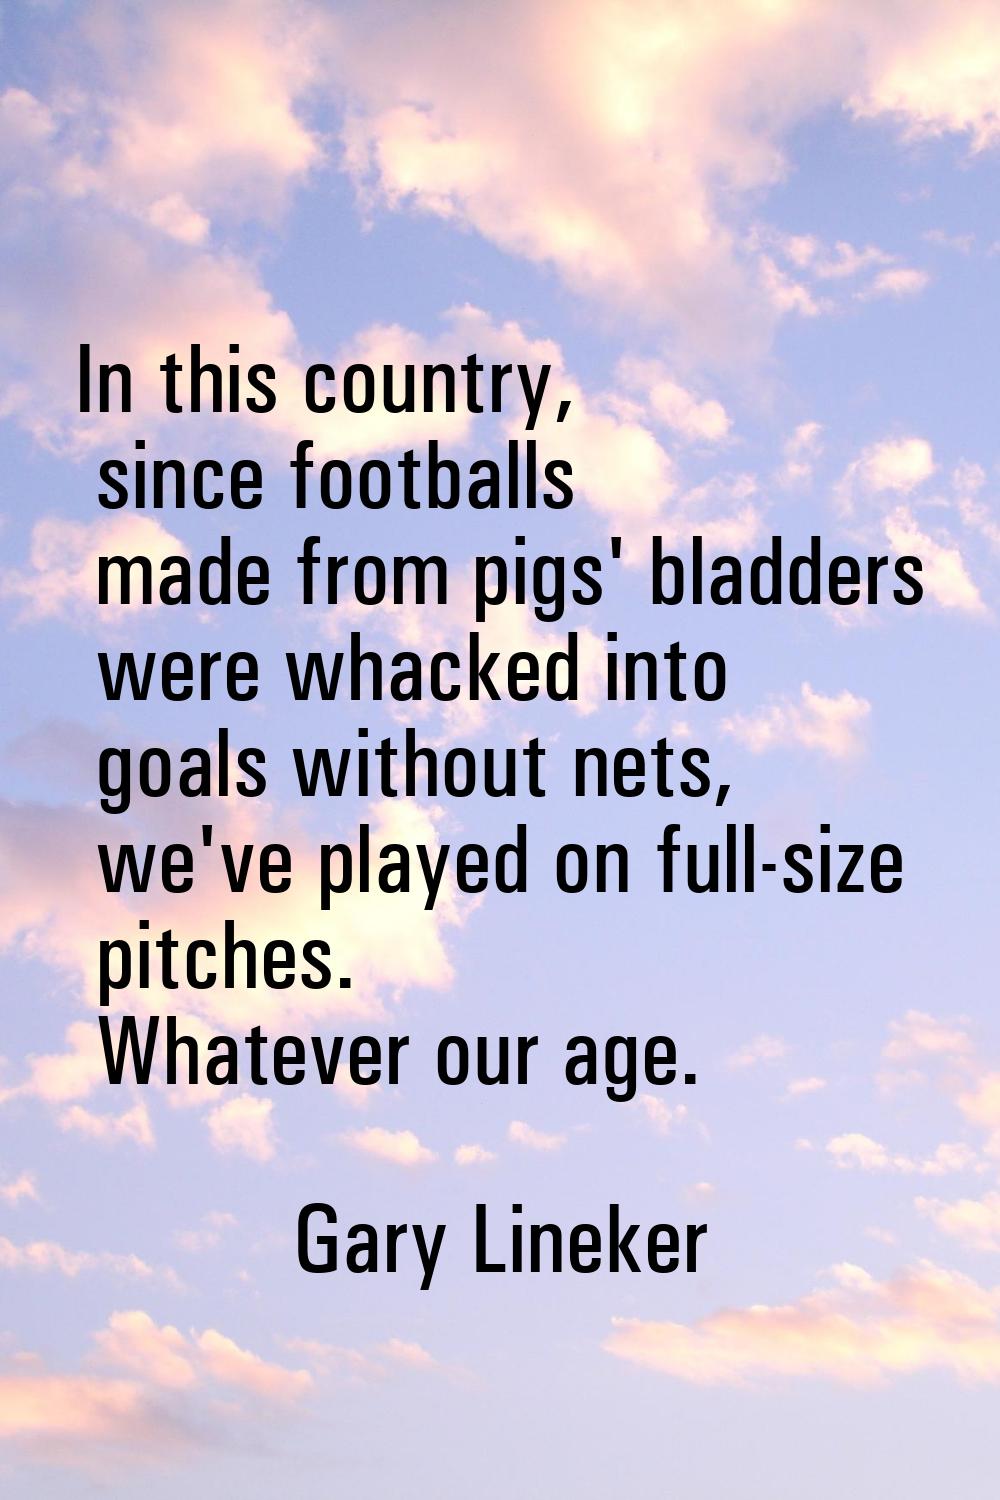 In this country, since footballs made from pigs' bladders were whacked into goals without nets, we'